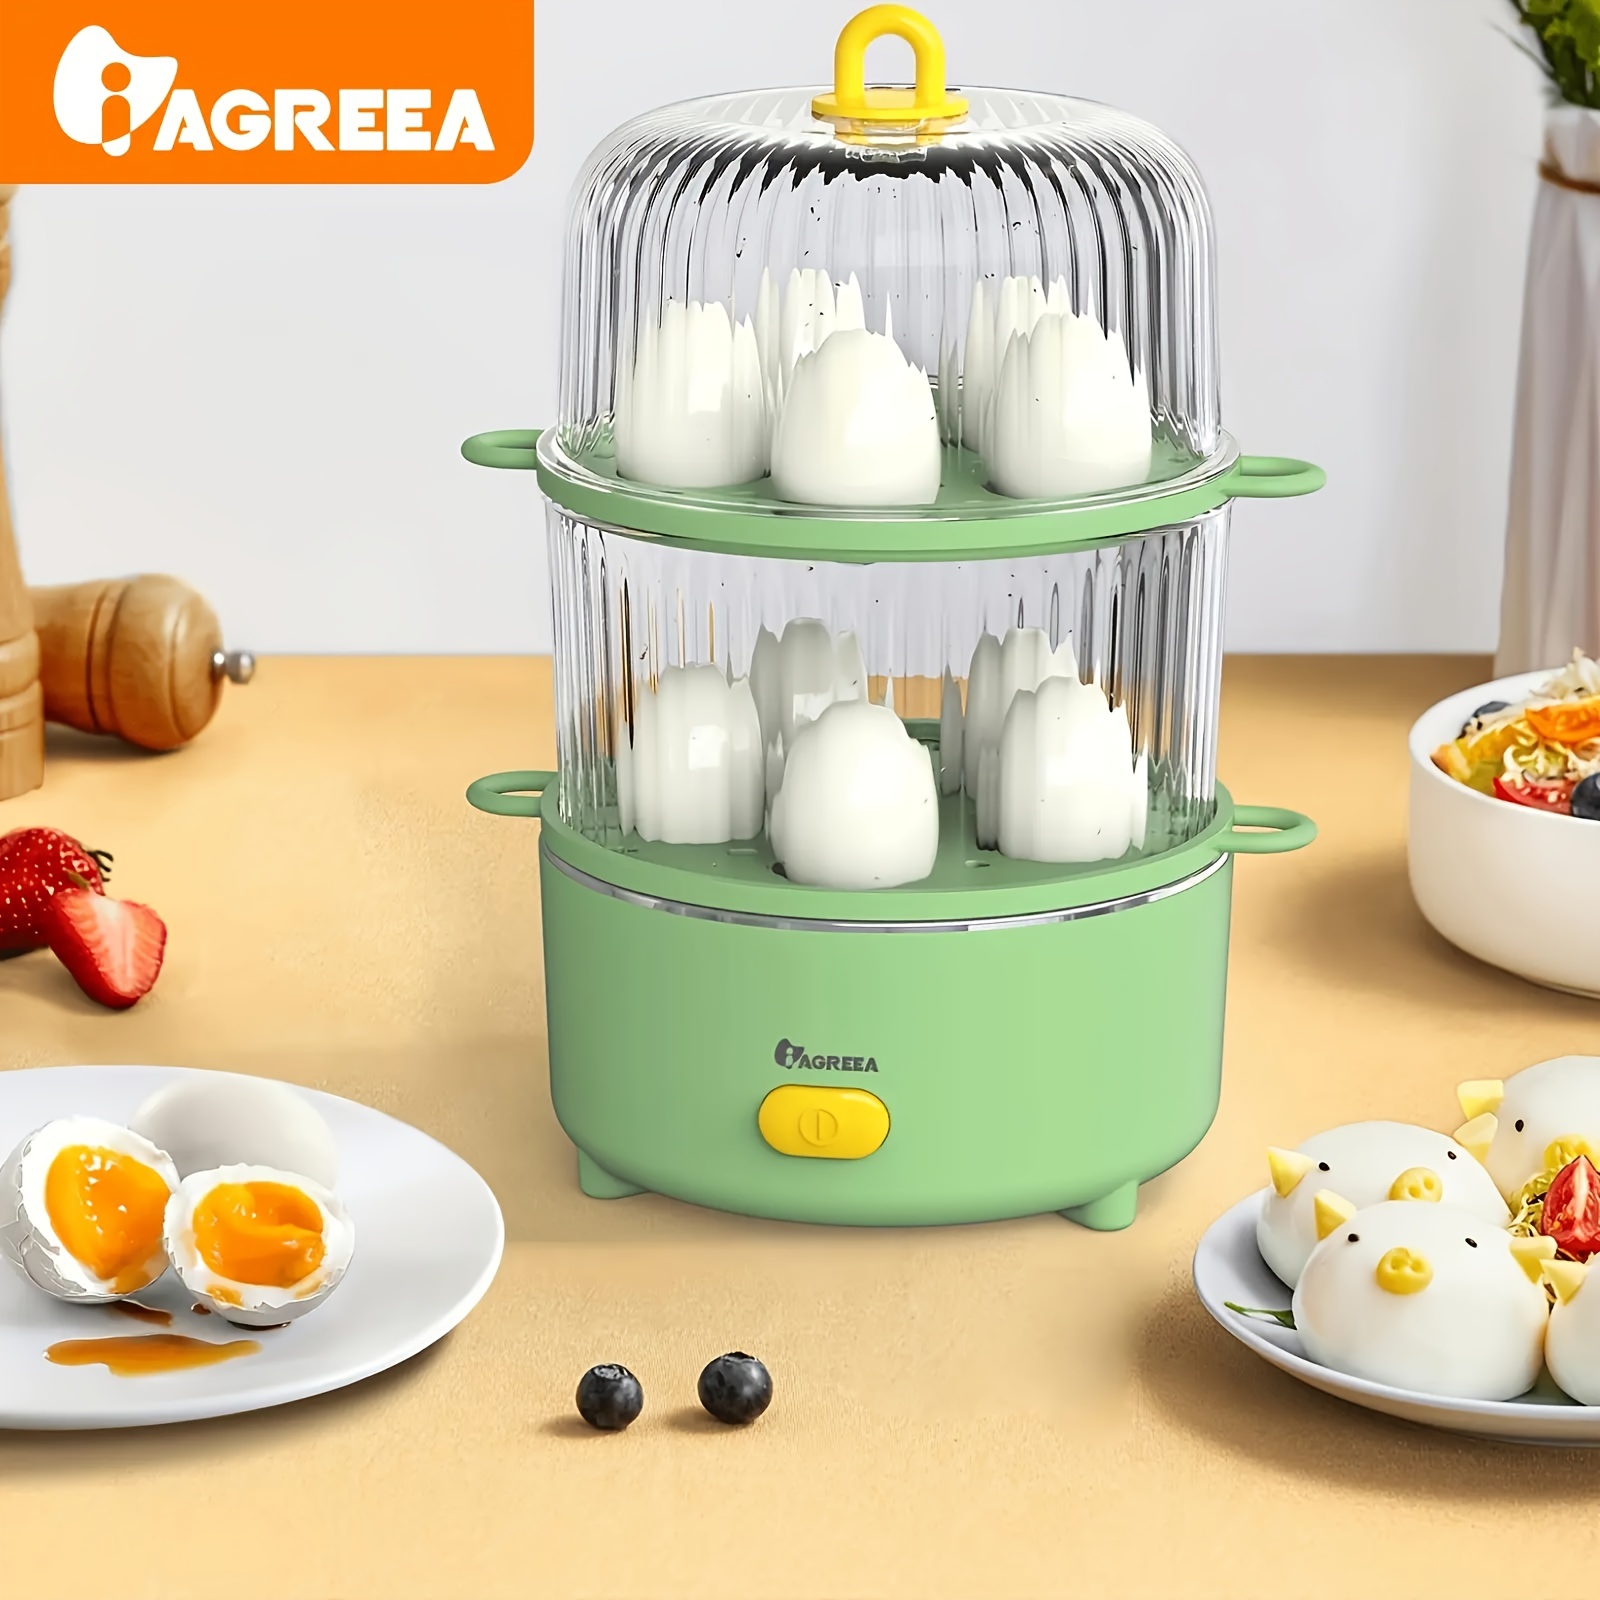 10 Capacity, Egg Cooker For Hard Boiled, Poached, Scrambled Eggs, Omelets,  Steamed Vegetables, & More, With Auto Shut Off Feature